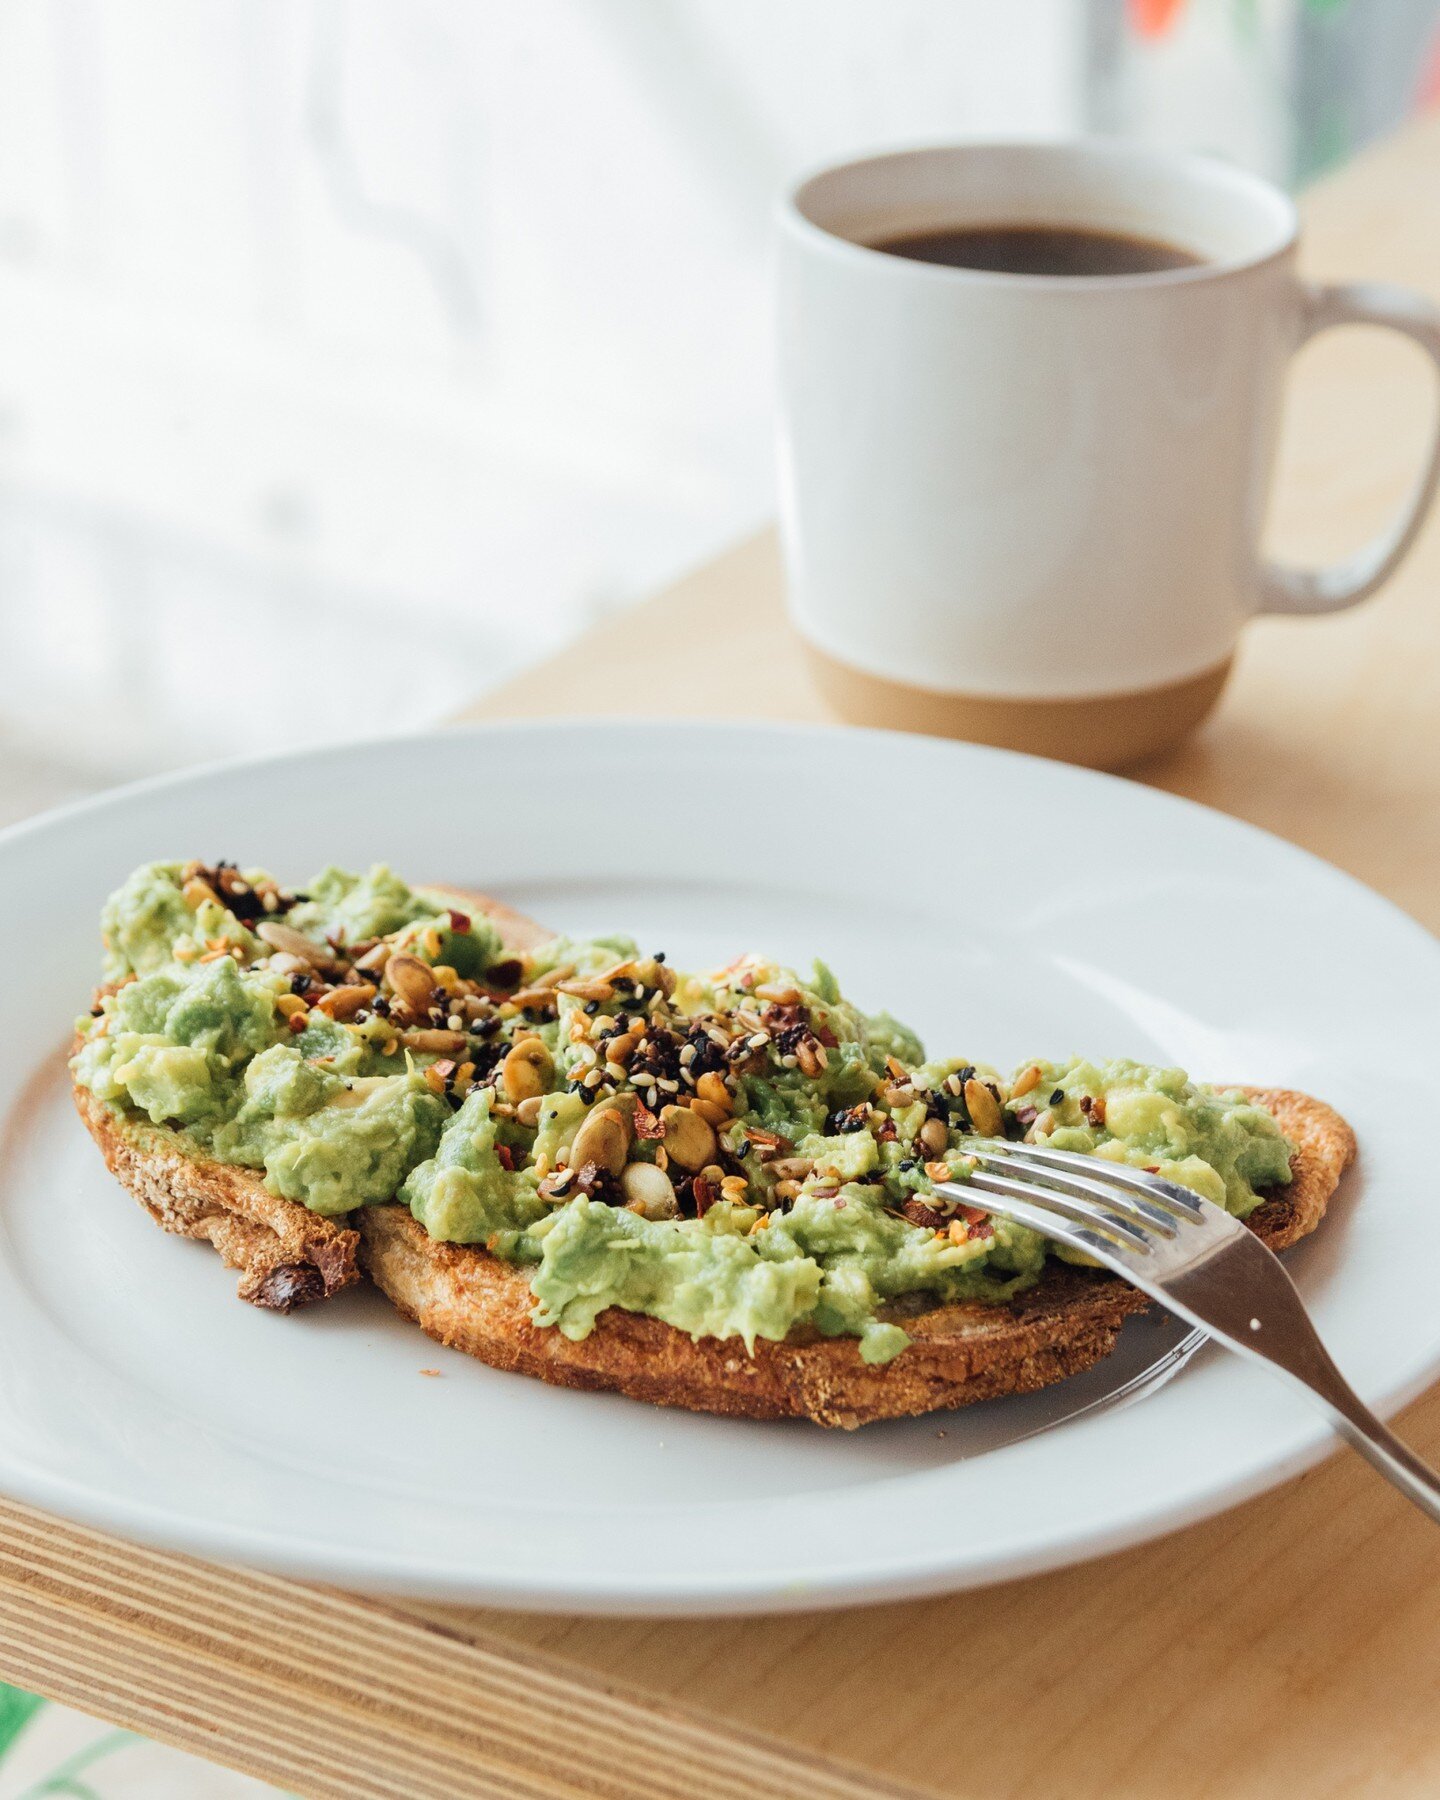 Keep it simple this Sunday with Avo on Toast and a Black Americano 😋